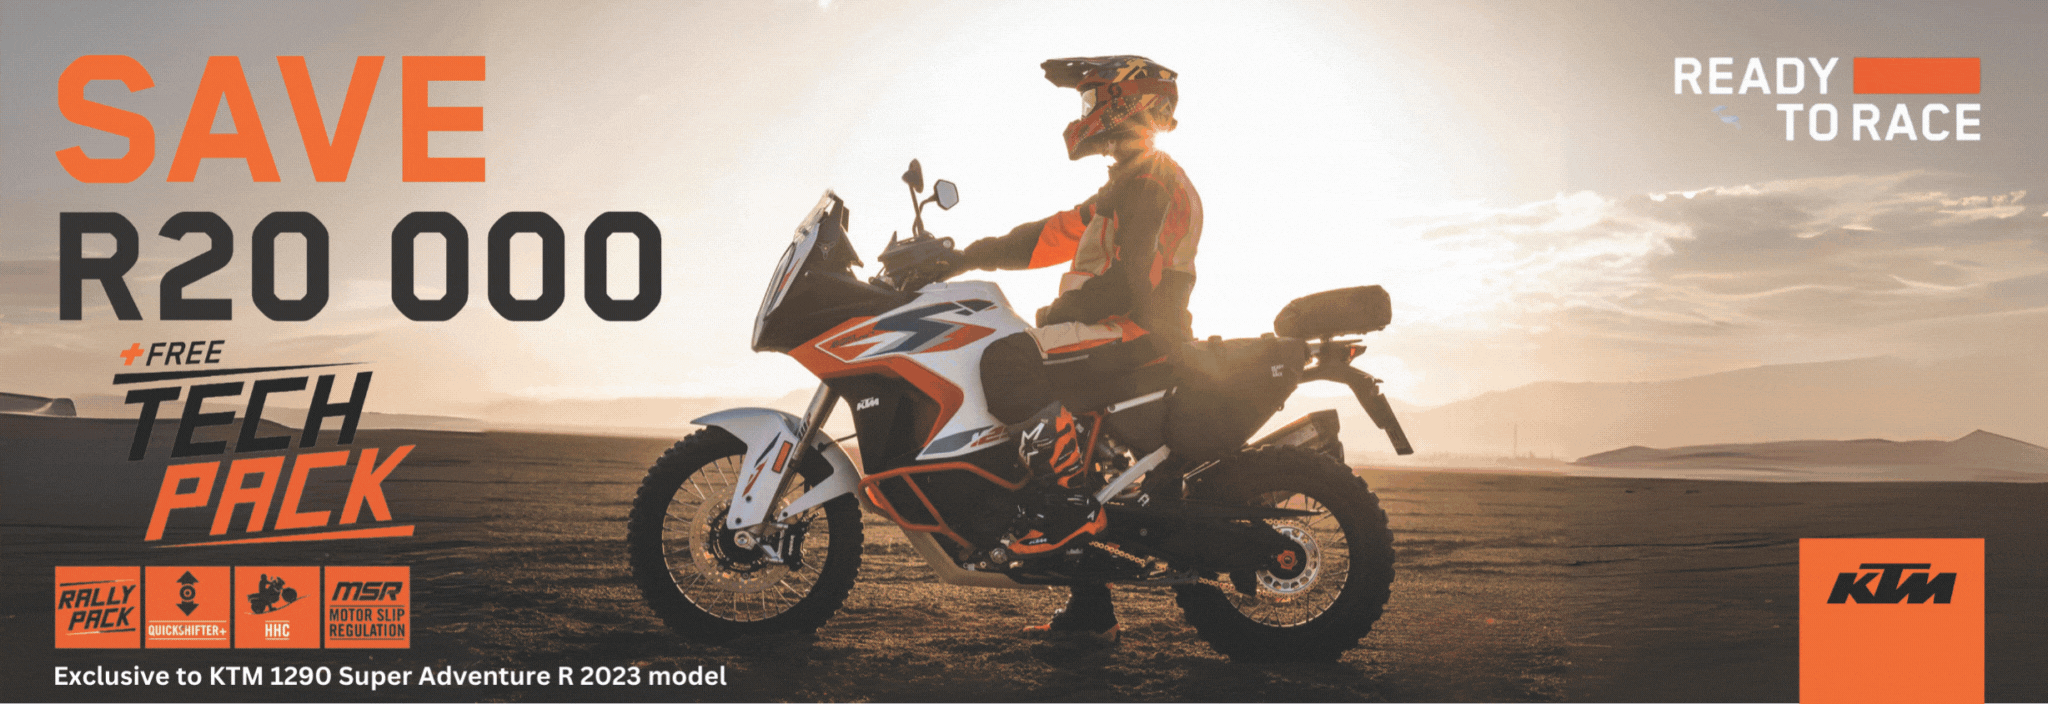 KTM MOTORCYCLES FOR SALE SOUTH AFRICA